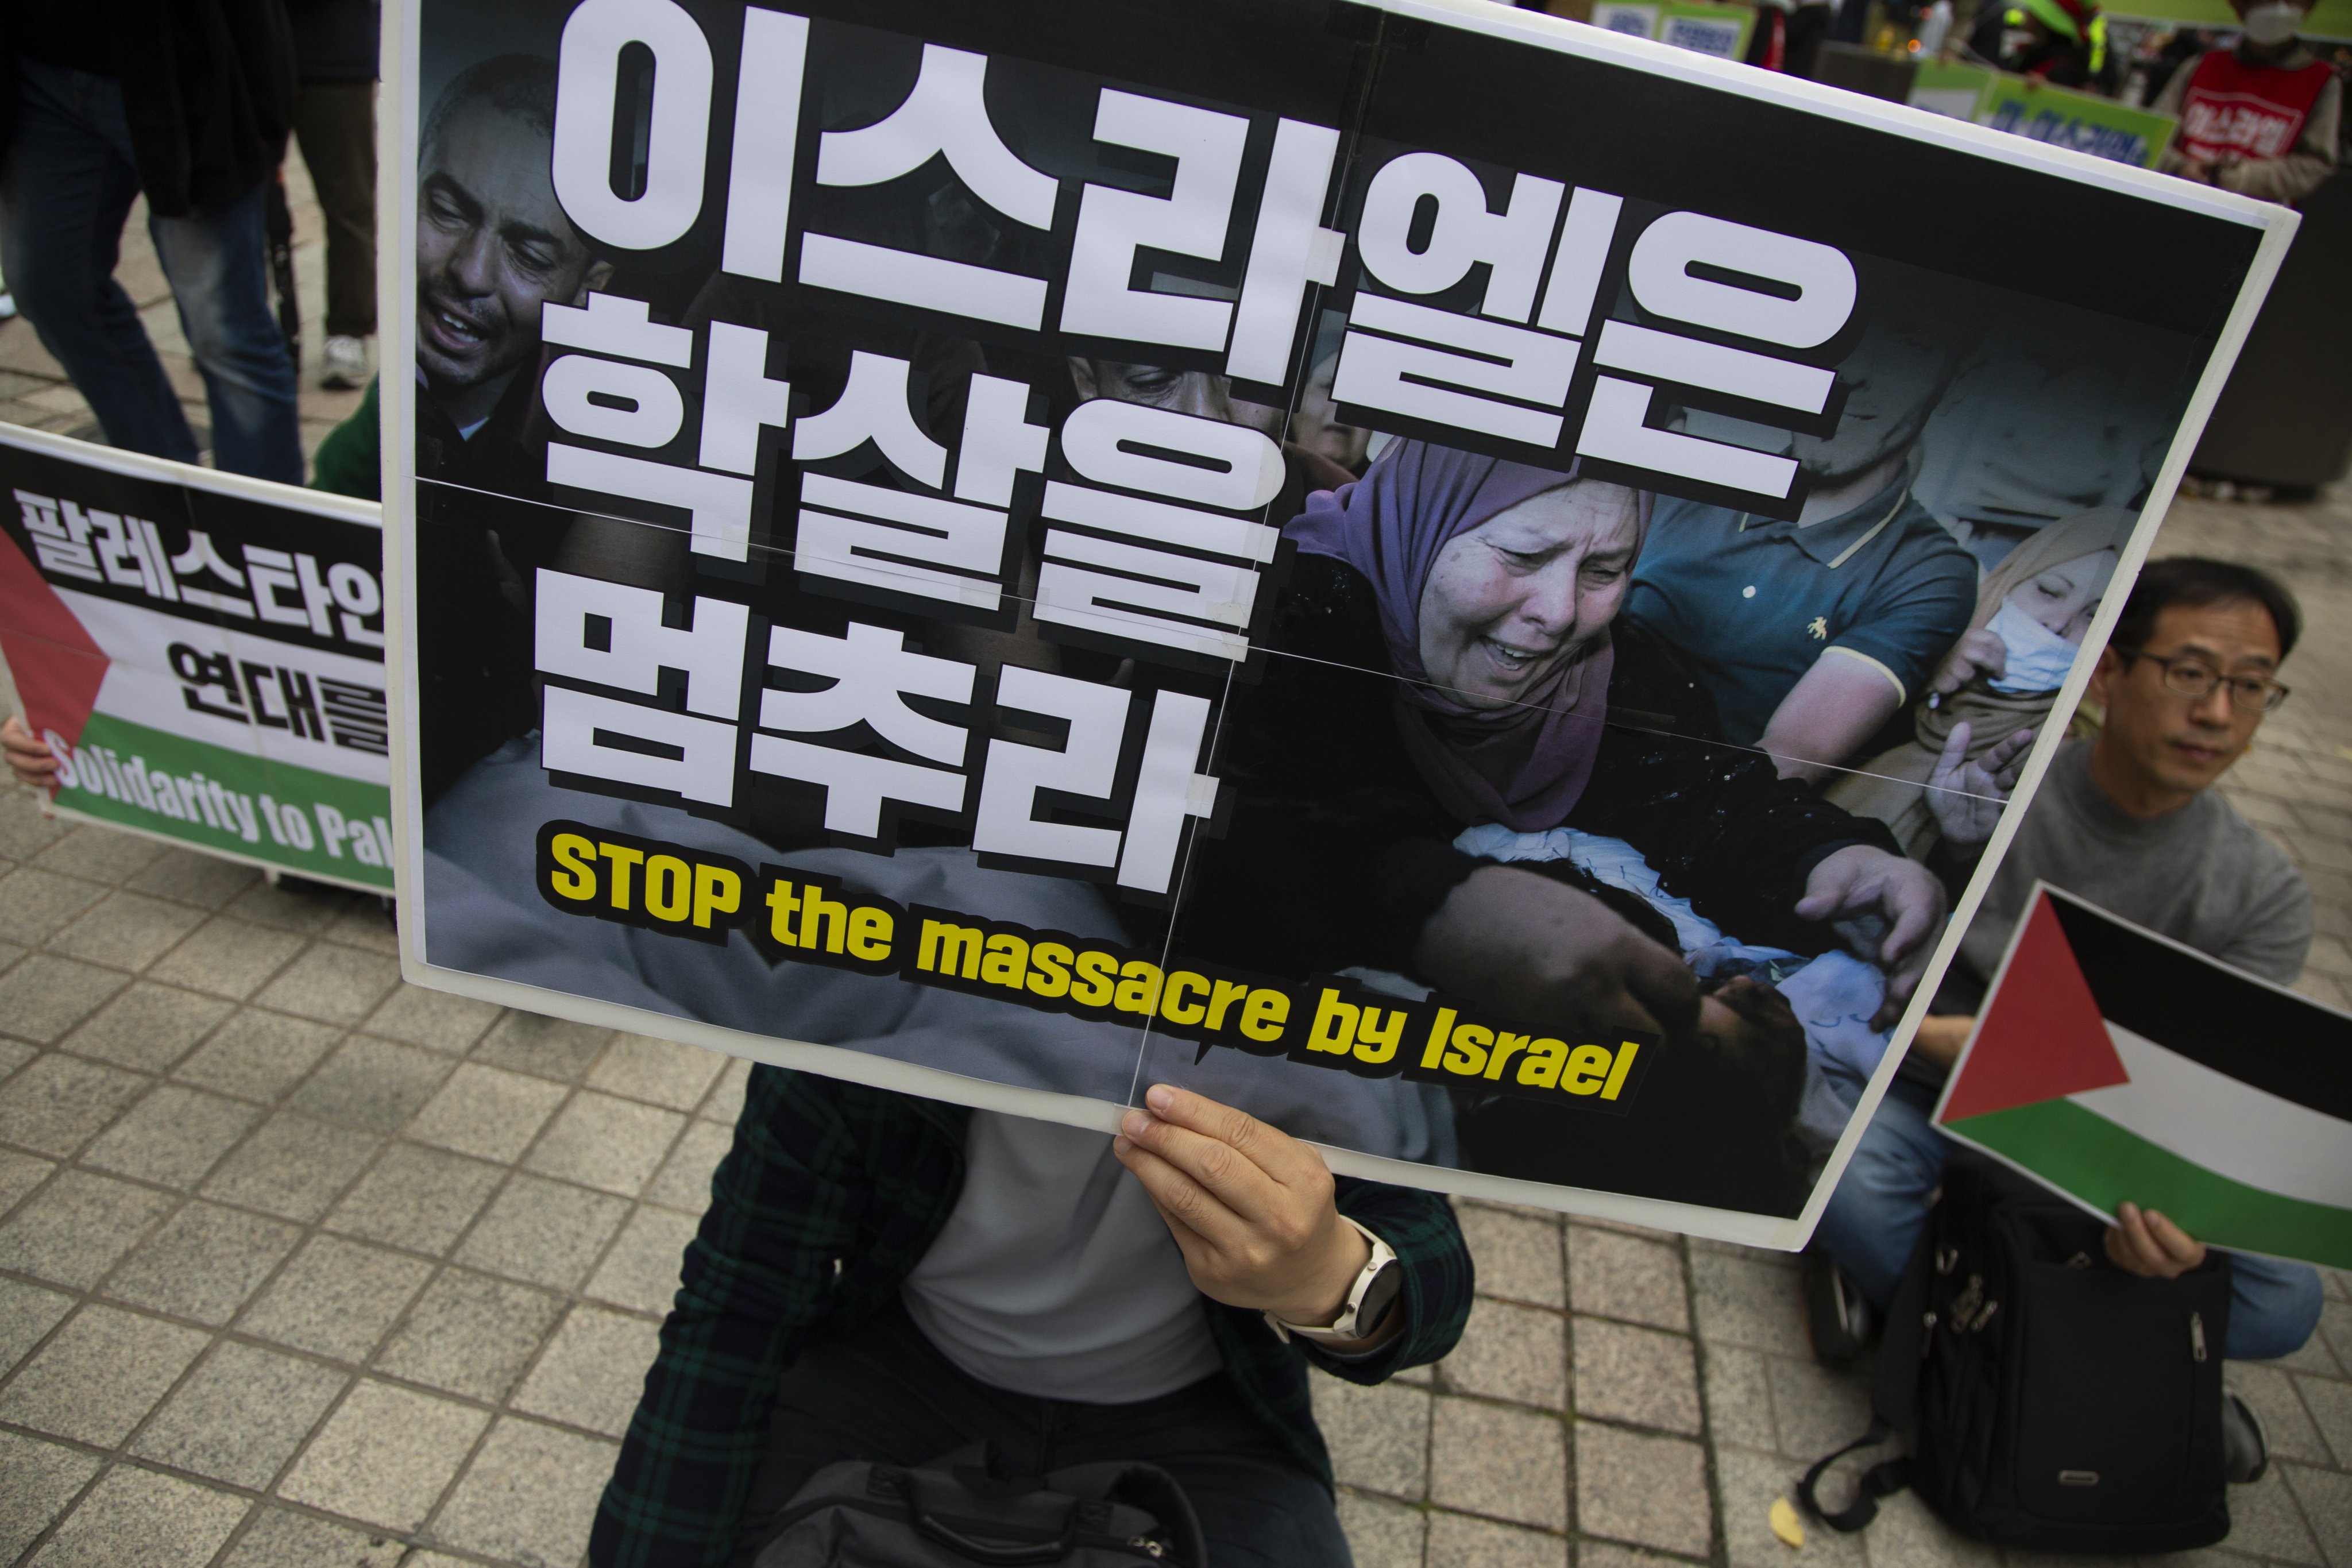 A protester holds up banner during a rally in support of Palestinians near the Israel Embassy in Seoul, South Korea, on November 1. Global public sympathy was largely with Israel in the wake of the attack by Hamas last month, but the Israeli military’s response has swung the pendulum of public opinion towards the Palestinian people. Photo: EPA-EFE